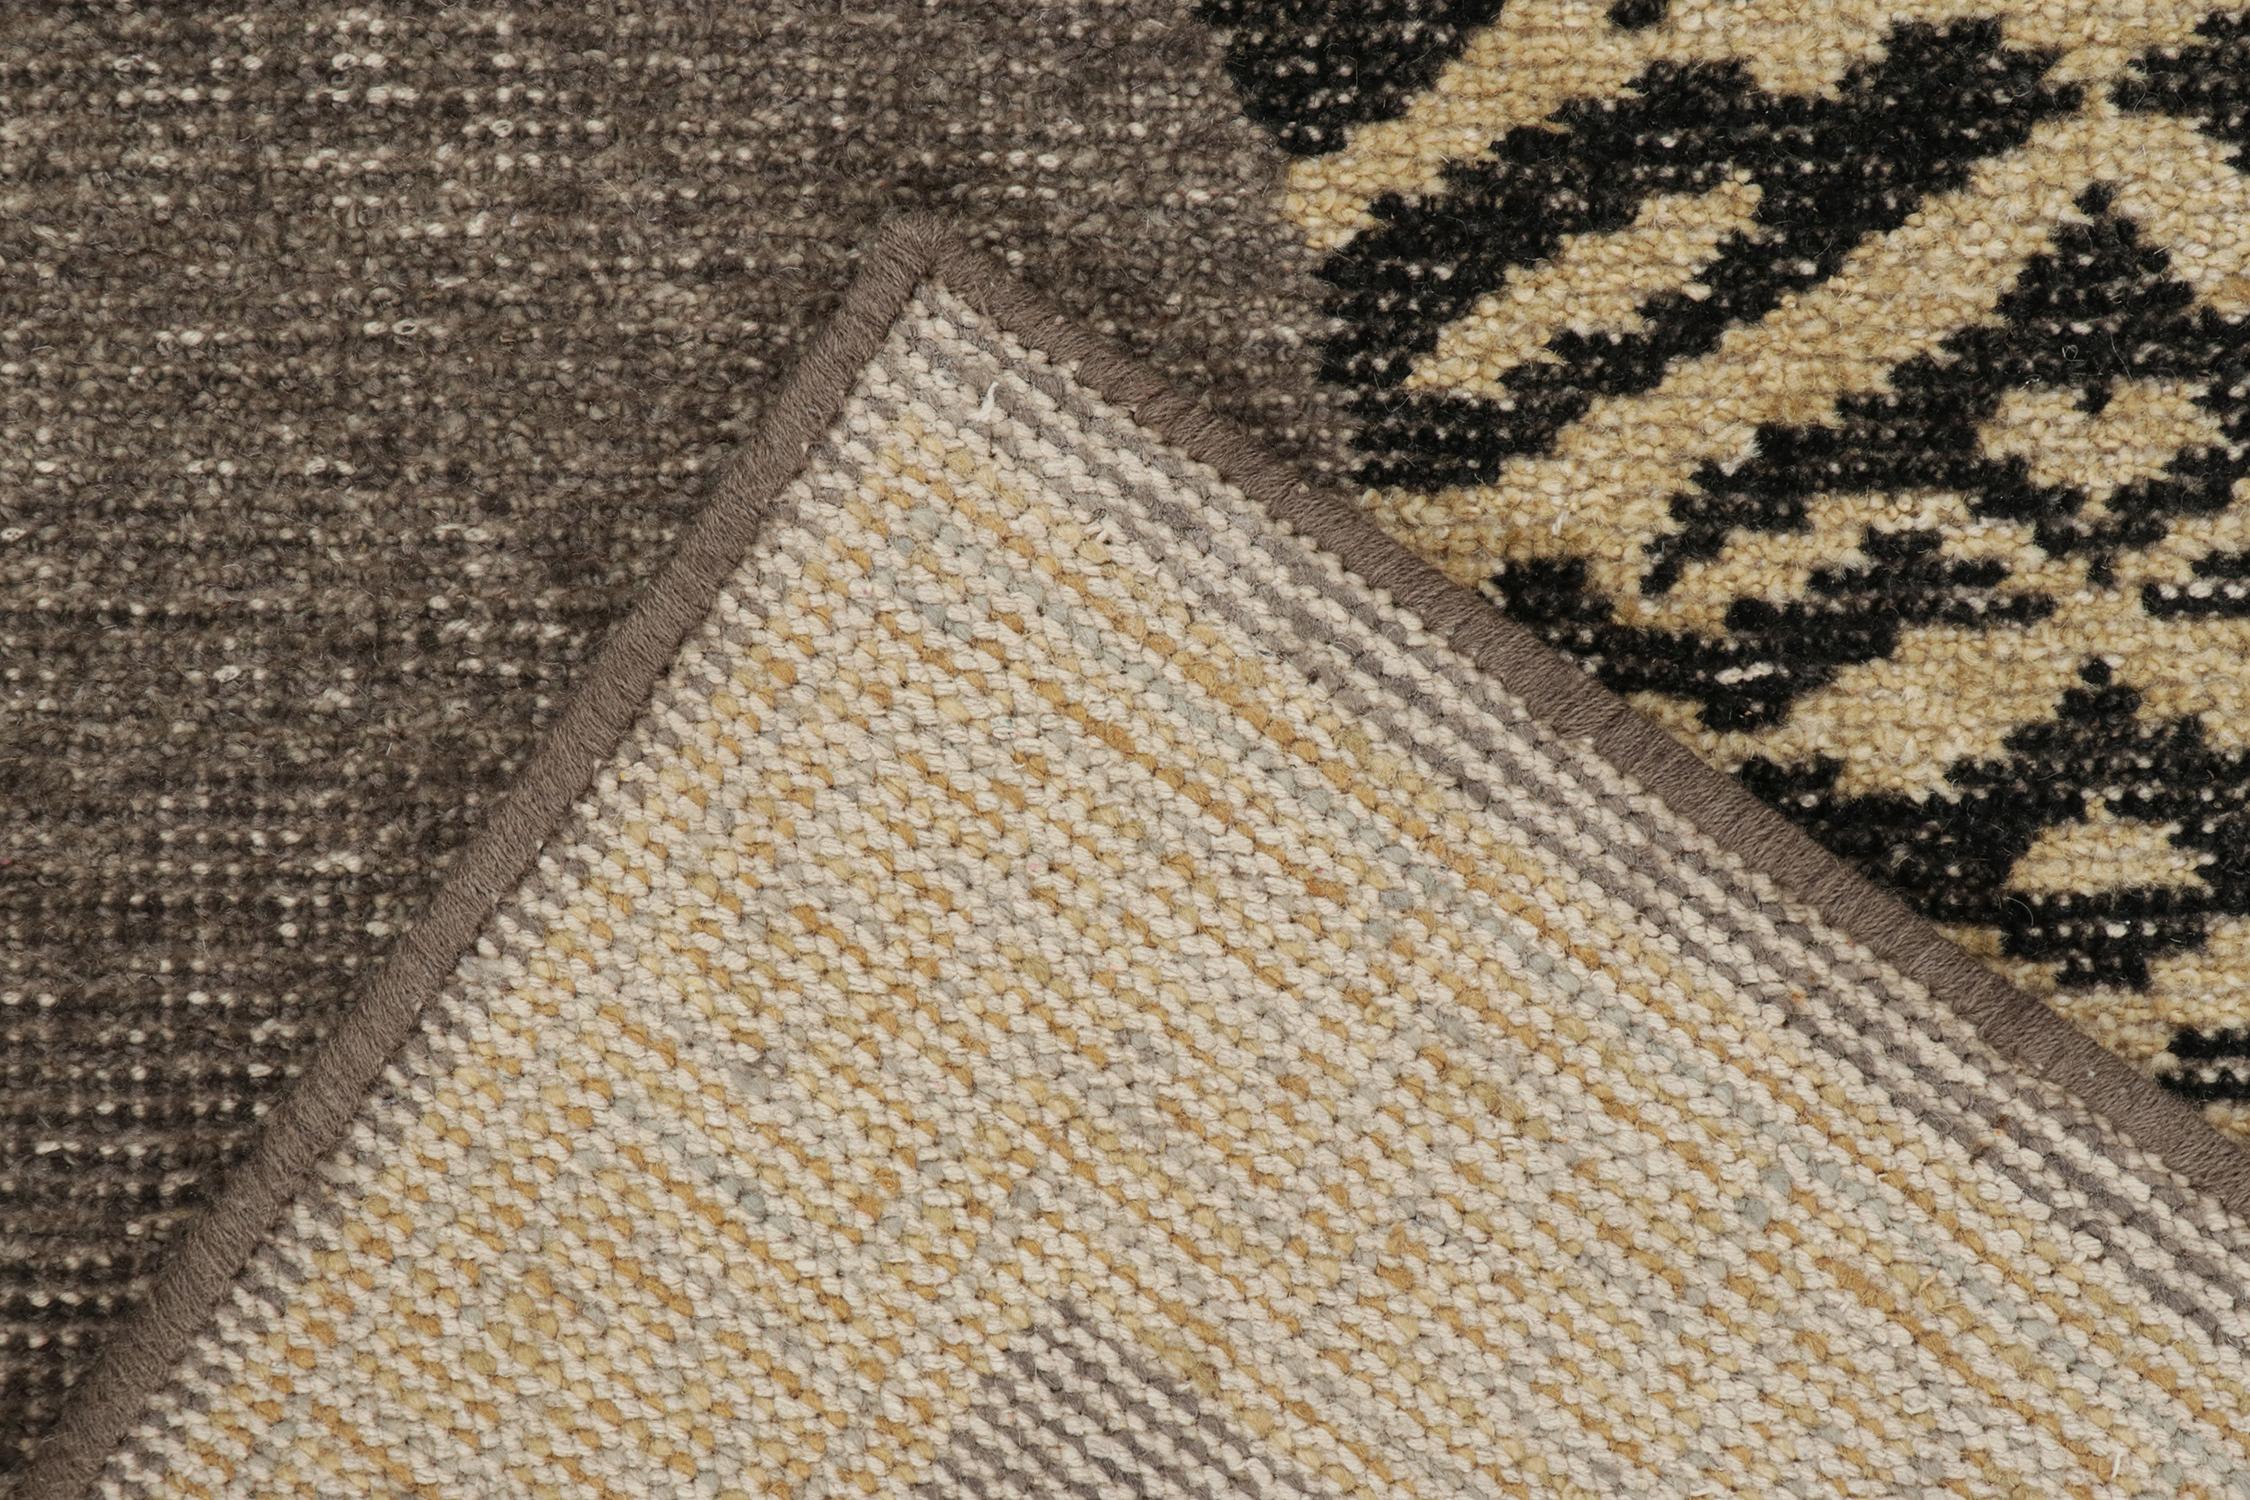 Wool Rug & Kilim’s Distressed Style Tiger Runner in Gray, Beige and Black Pictorial For Sale